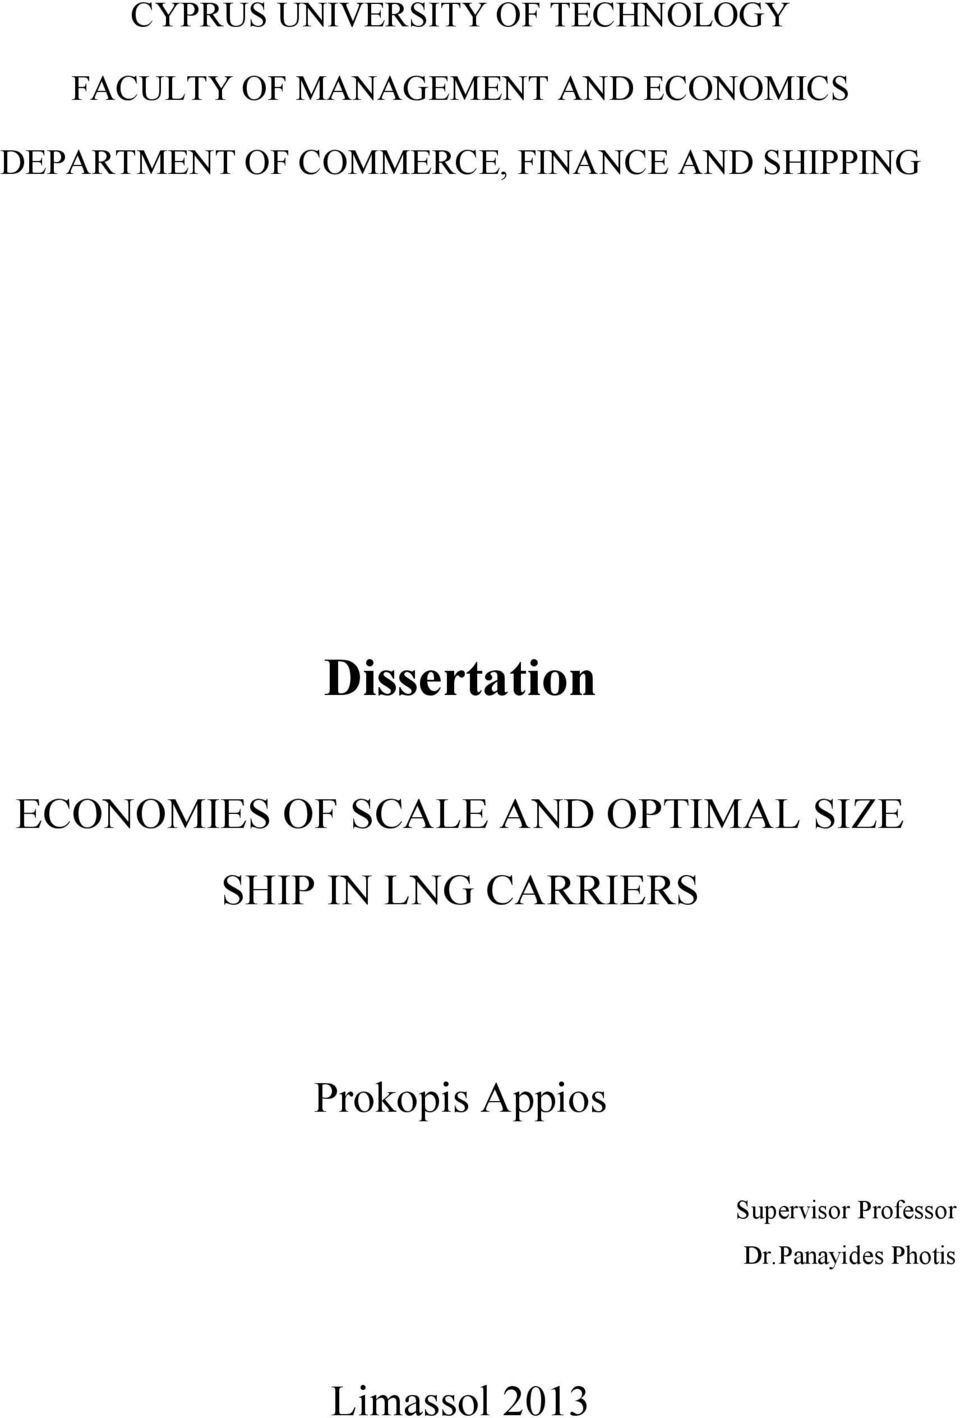 Dissertation ECONOMIES OF SCALE AND OPTIMAL SIZE SHIP IN LNG